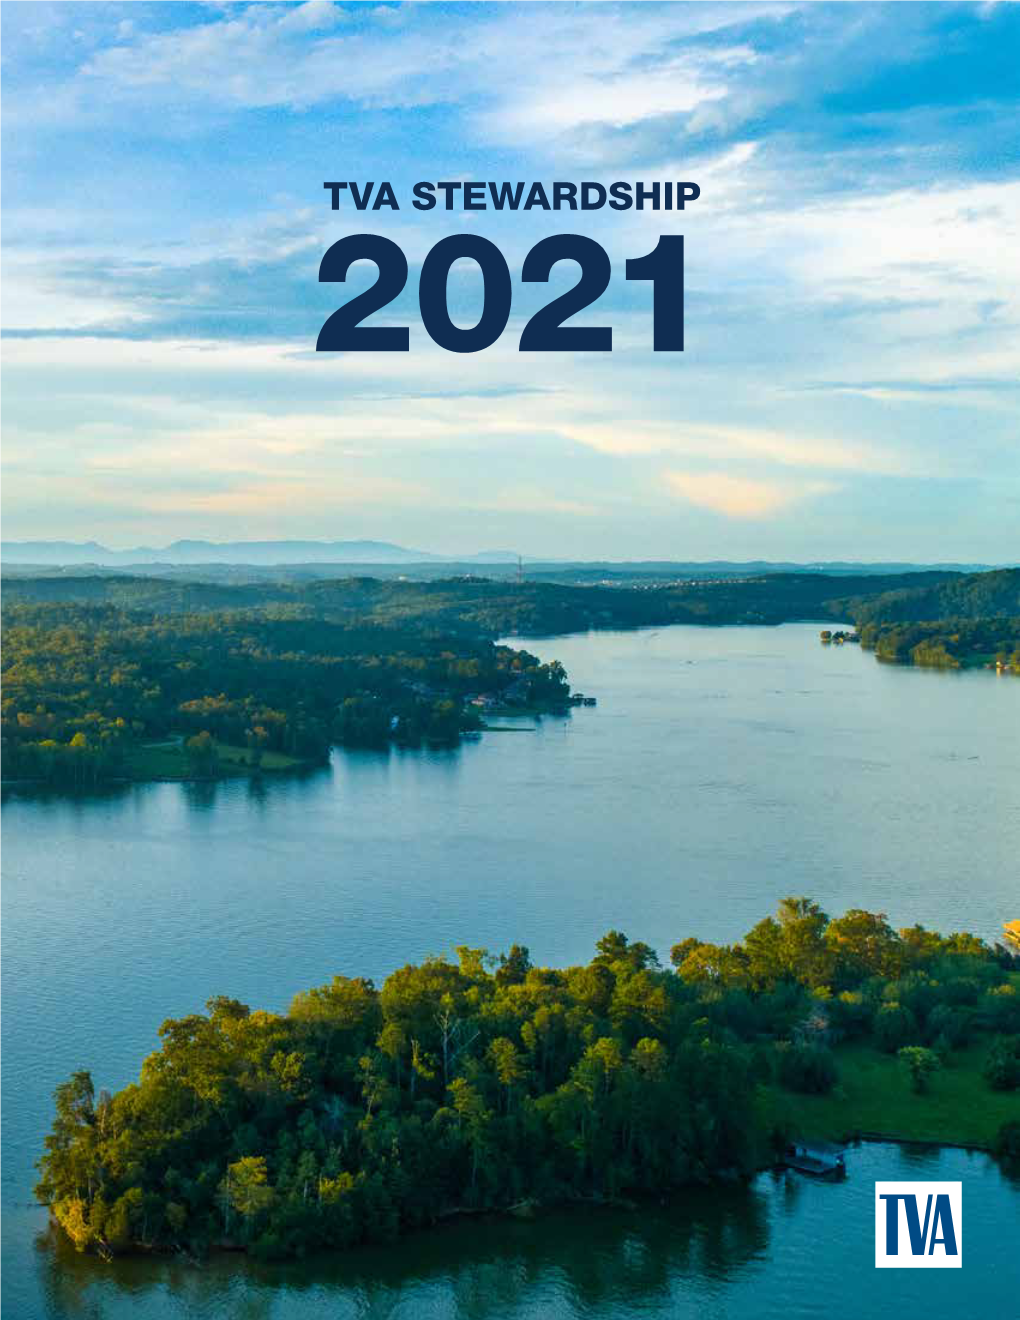 Tva Stewardship 2021 Counties We’Ve Served Through Stewardship Projects